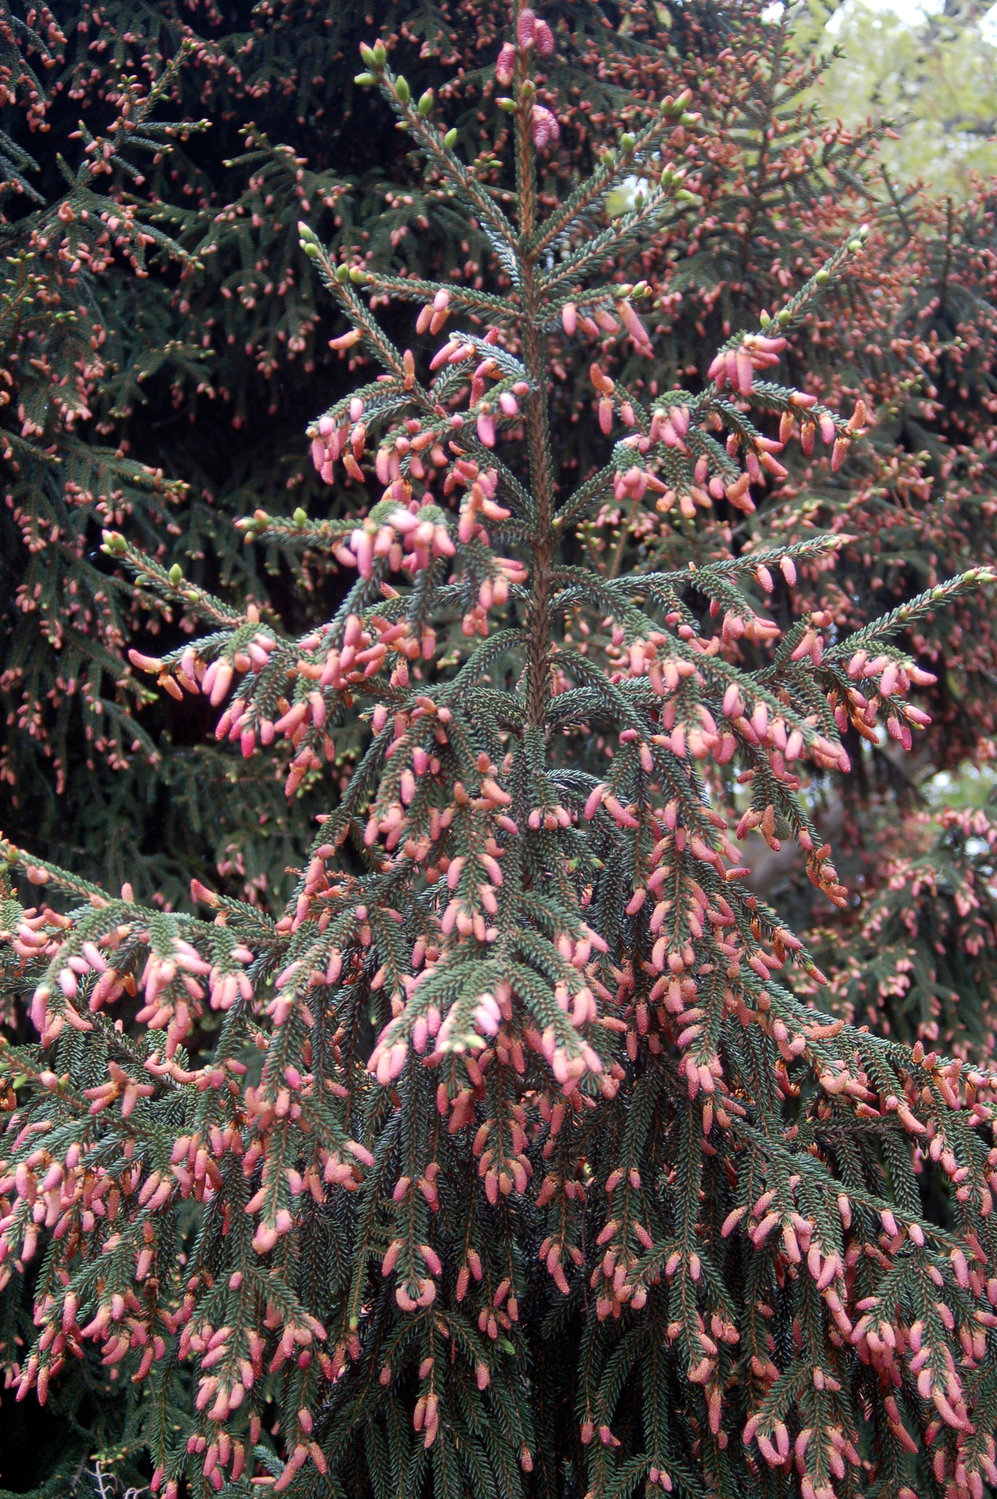 This May 11, 2006, image provided by Vincent A. Simeone shows the showy, long purple cones of an Oriental spruce (Picea orientalis) tree. (Vincent A. Simeone via AP)